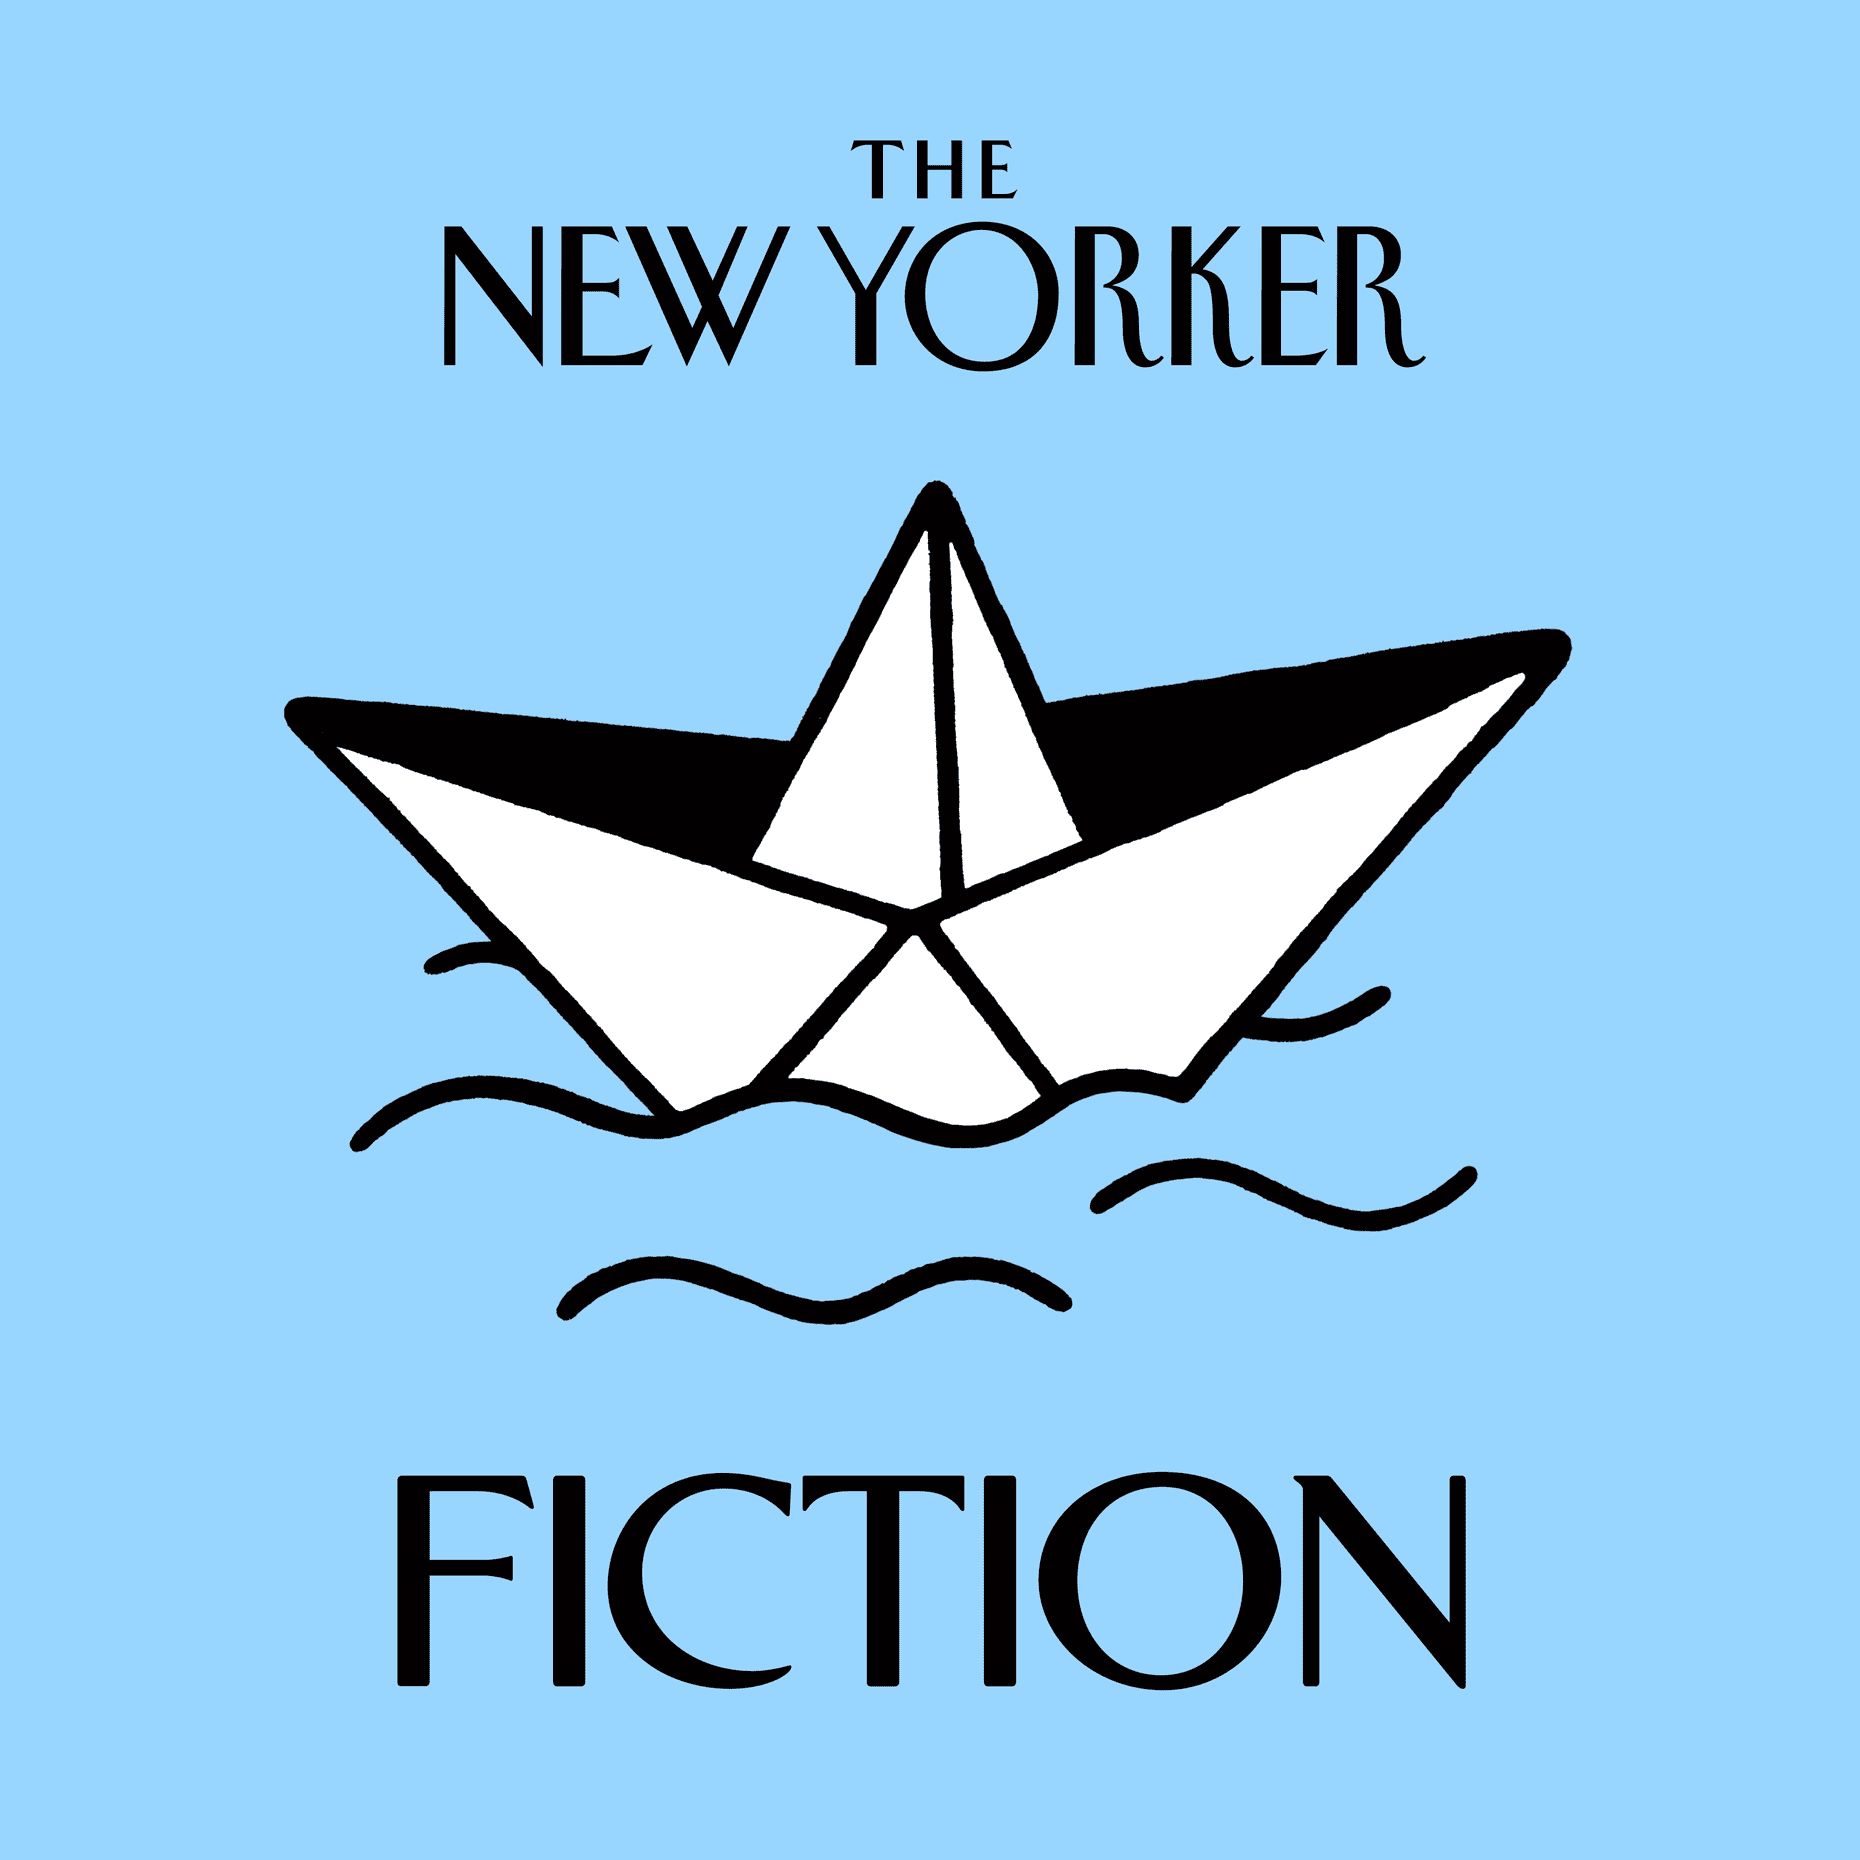 You Might Also Like: The New Yorker: Fiction